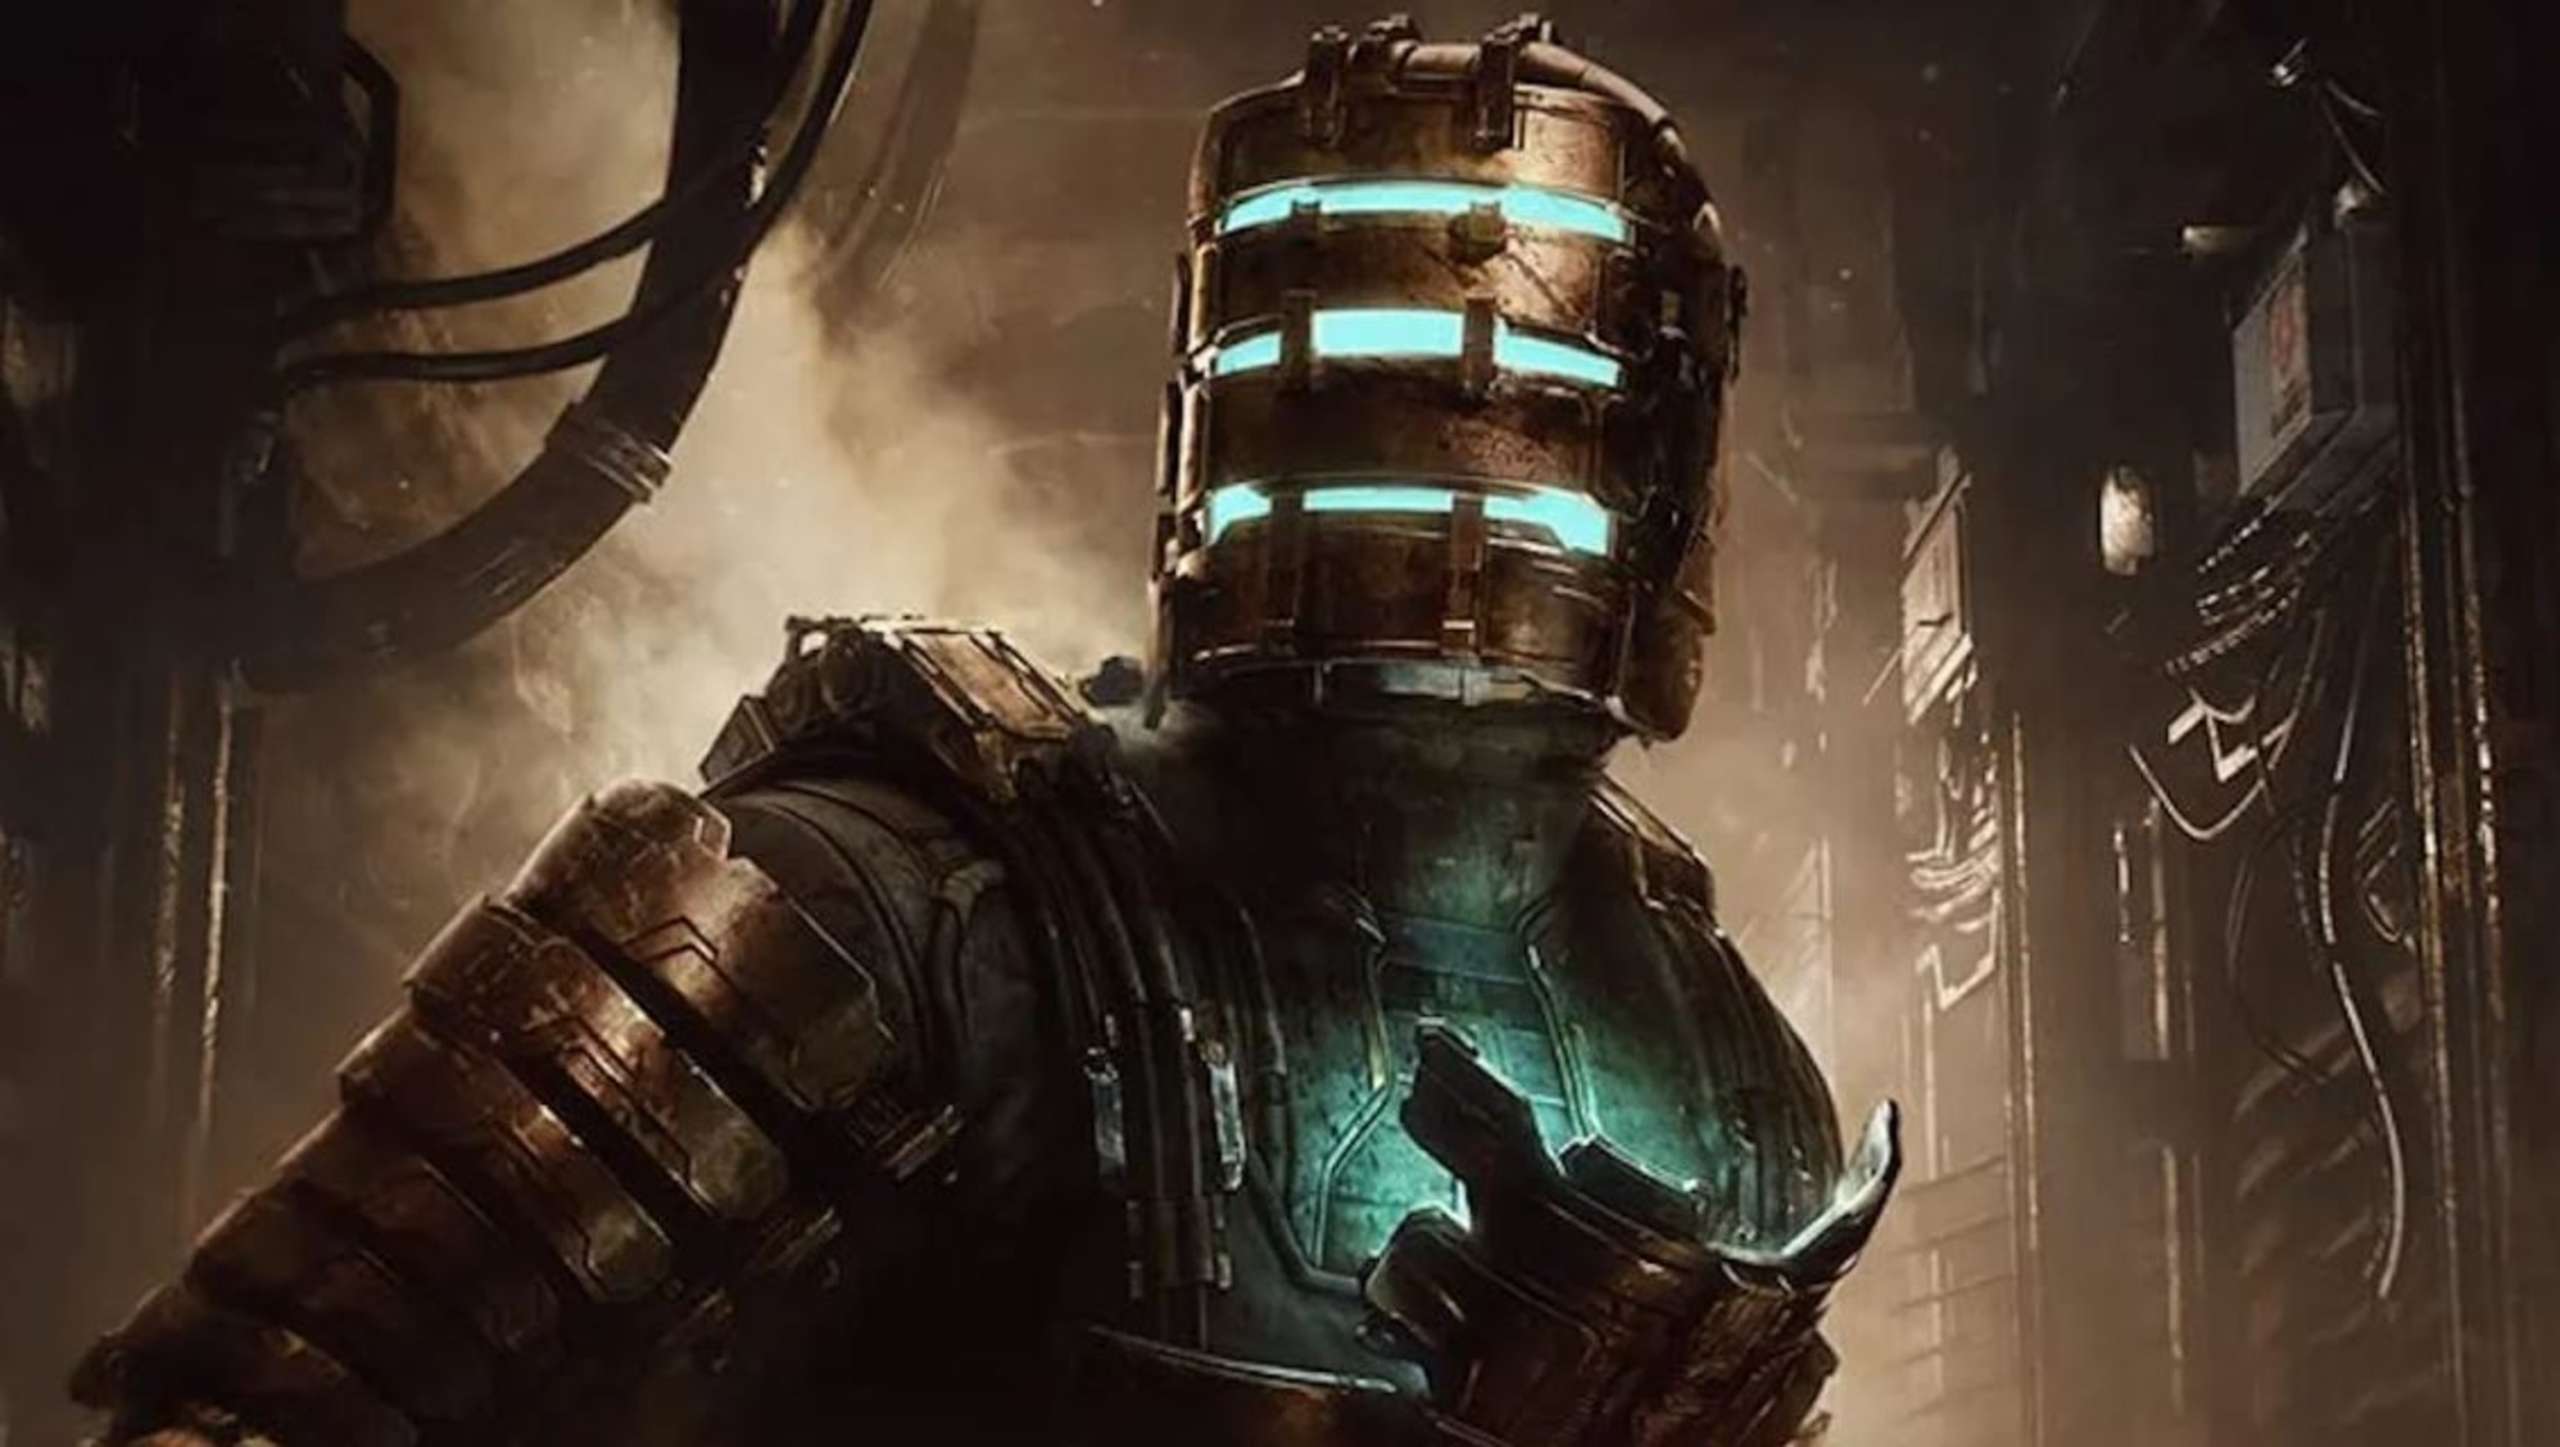 However, Despite A Recent Trailer Suggesting Otherwise, It Appears As Though The Impending Dead Space Reboot Will Be A Next-Gen Exclusive, Unavailable On PS4